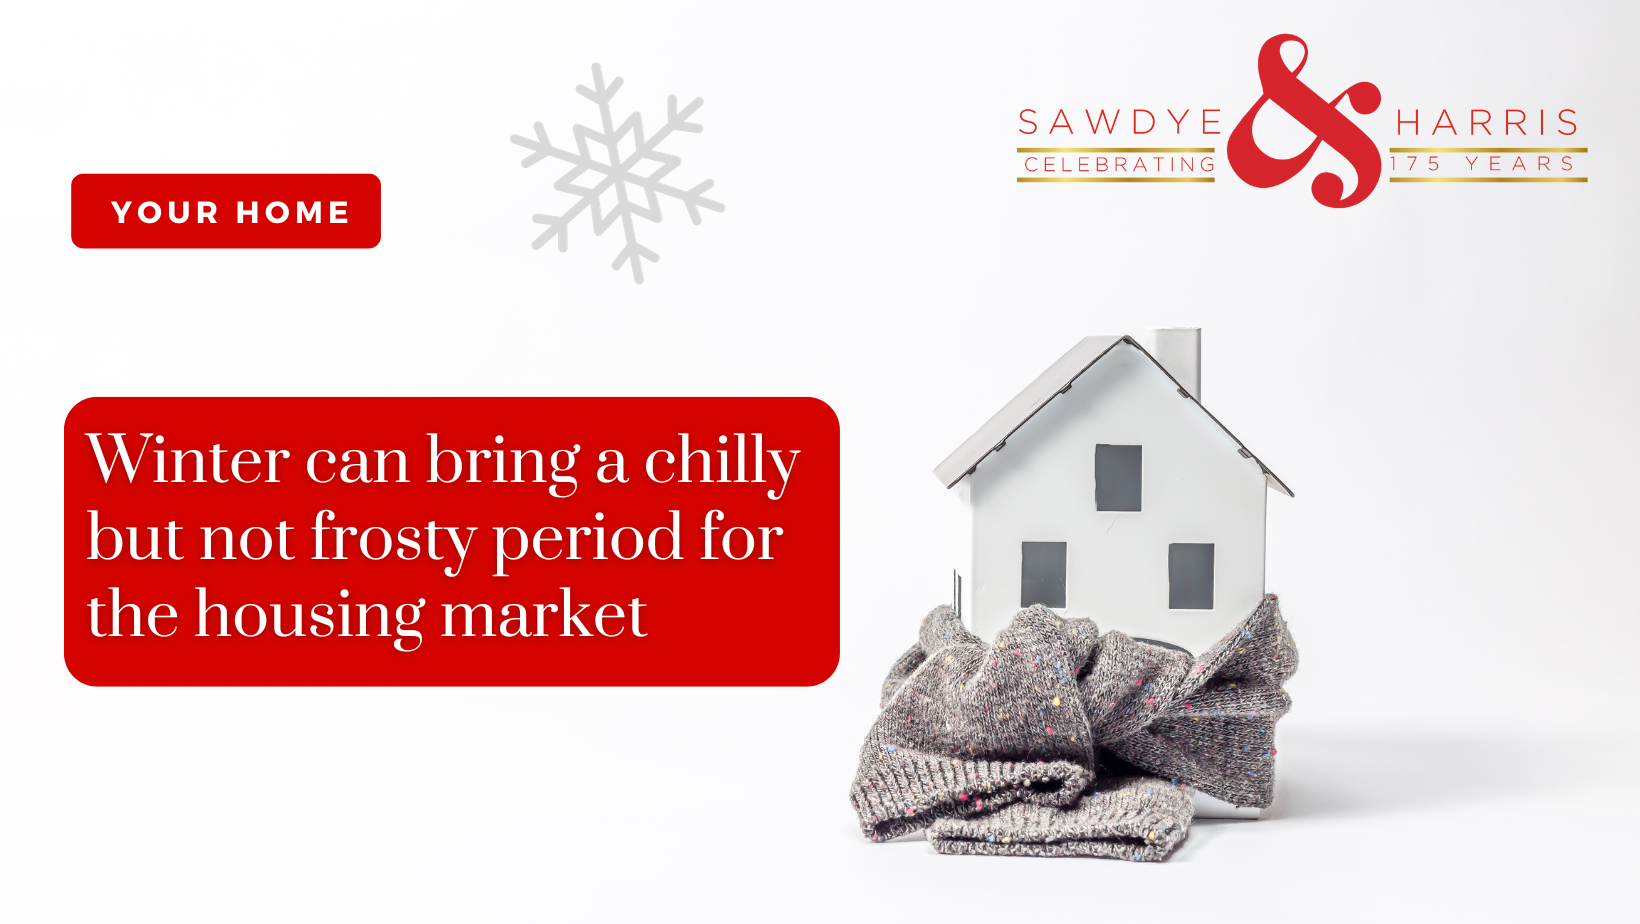 Winter Brings a Chilly but Not Frosty Period for the Housing Market